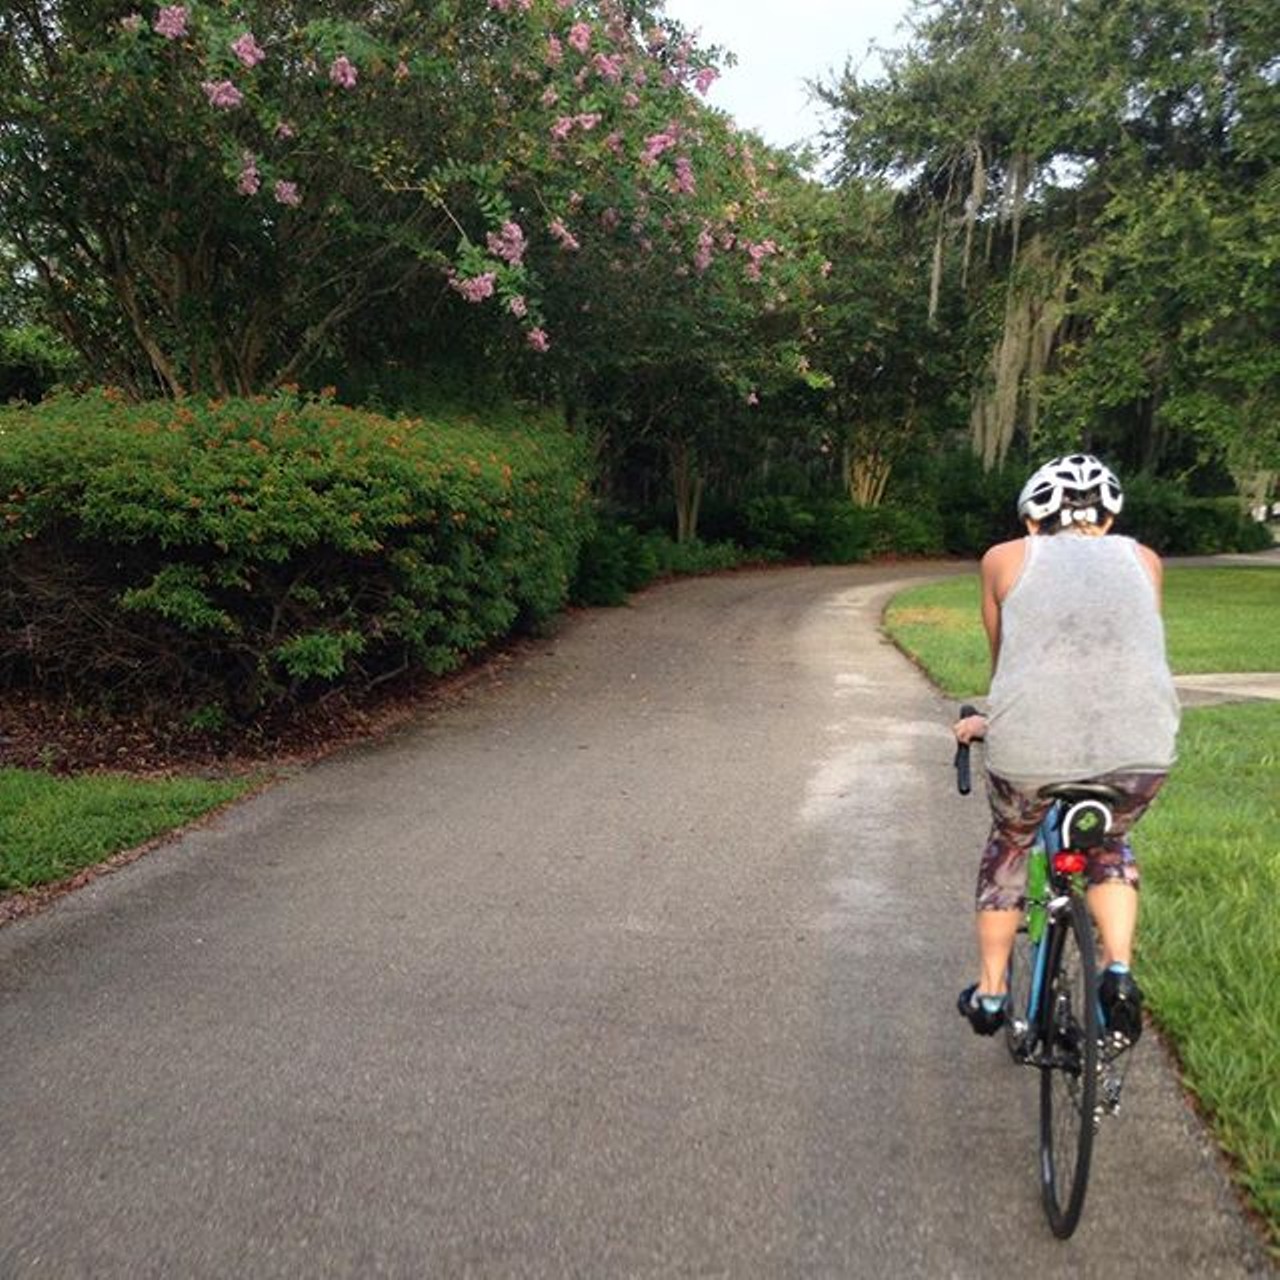 Cady Way Trail
Beginning at the intersection of Aloma Avenue and Howell Branch Road, the 6.5- mile Cady Way Trail winds through various residential neighborhoods and Fashion Square Mall. It links to Cross Seminole Trail and parking is available at Cady Way Park, Fashion Square Mall and Winter Pines Golf Course.
Photo via Sunshineinmotion/Instagram